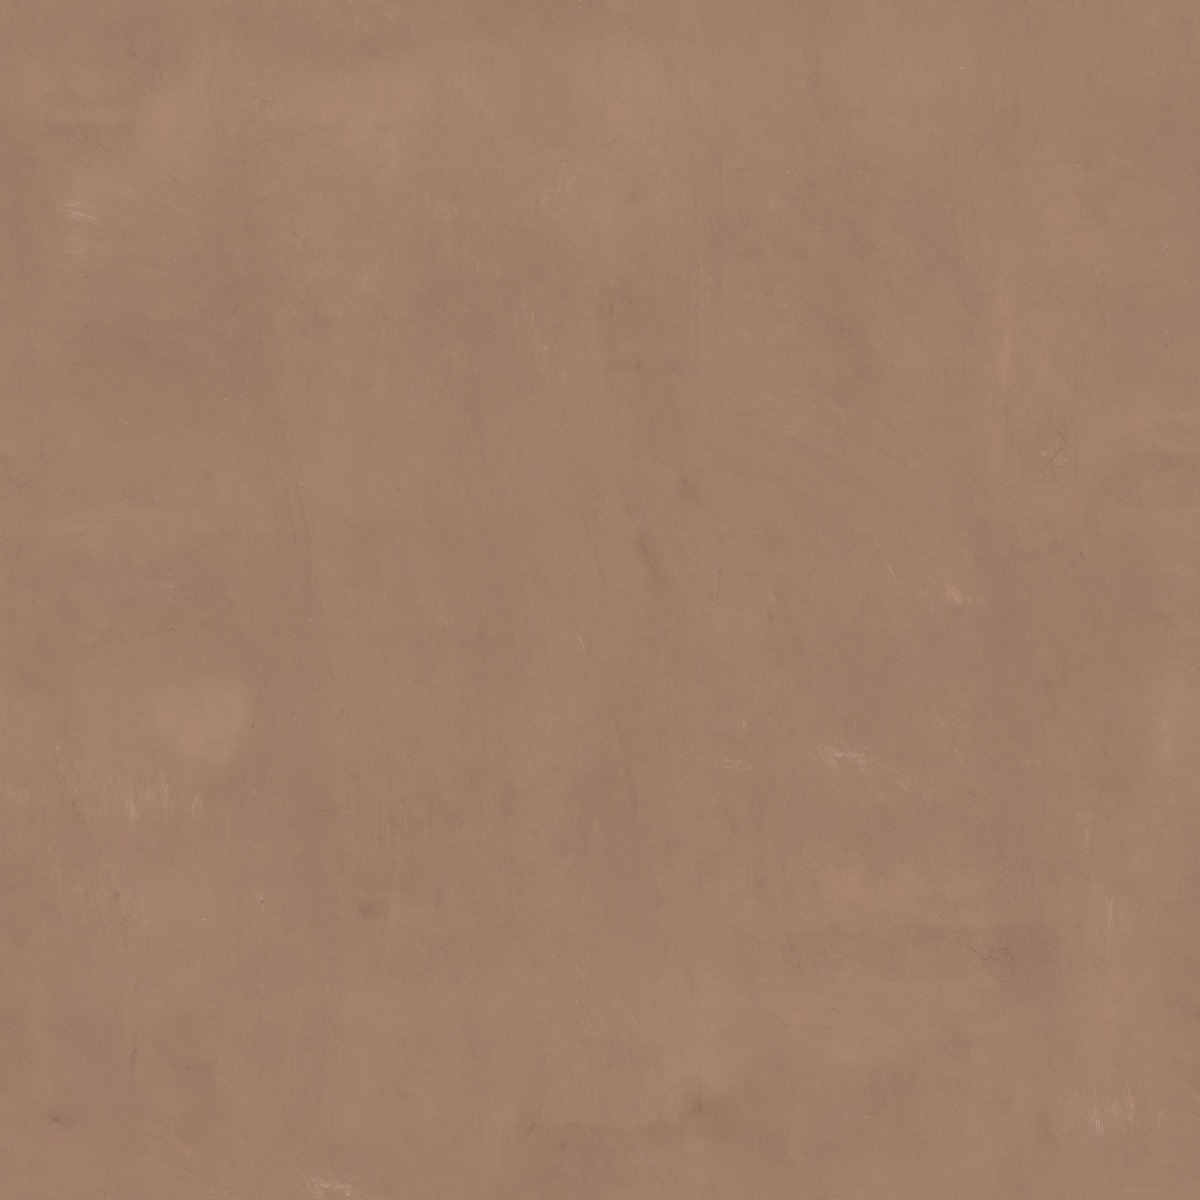 A seamless organic texture with clay plaster units arranged in a None pattern